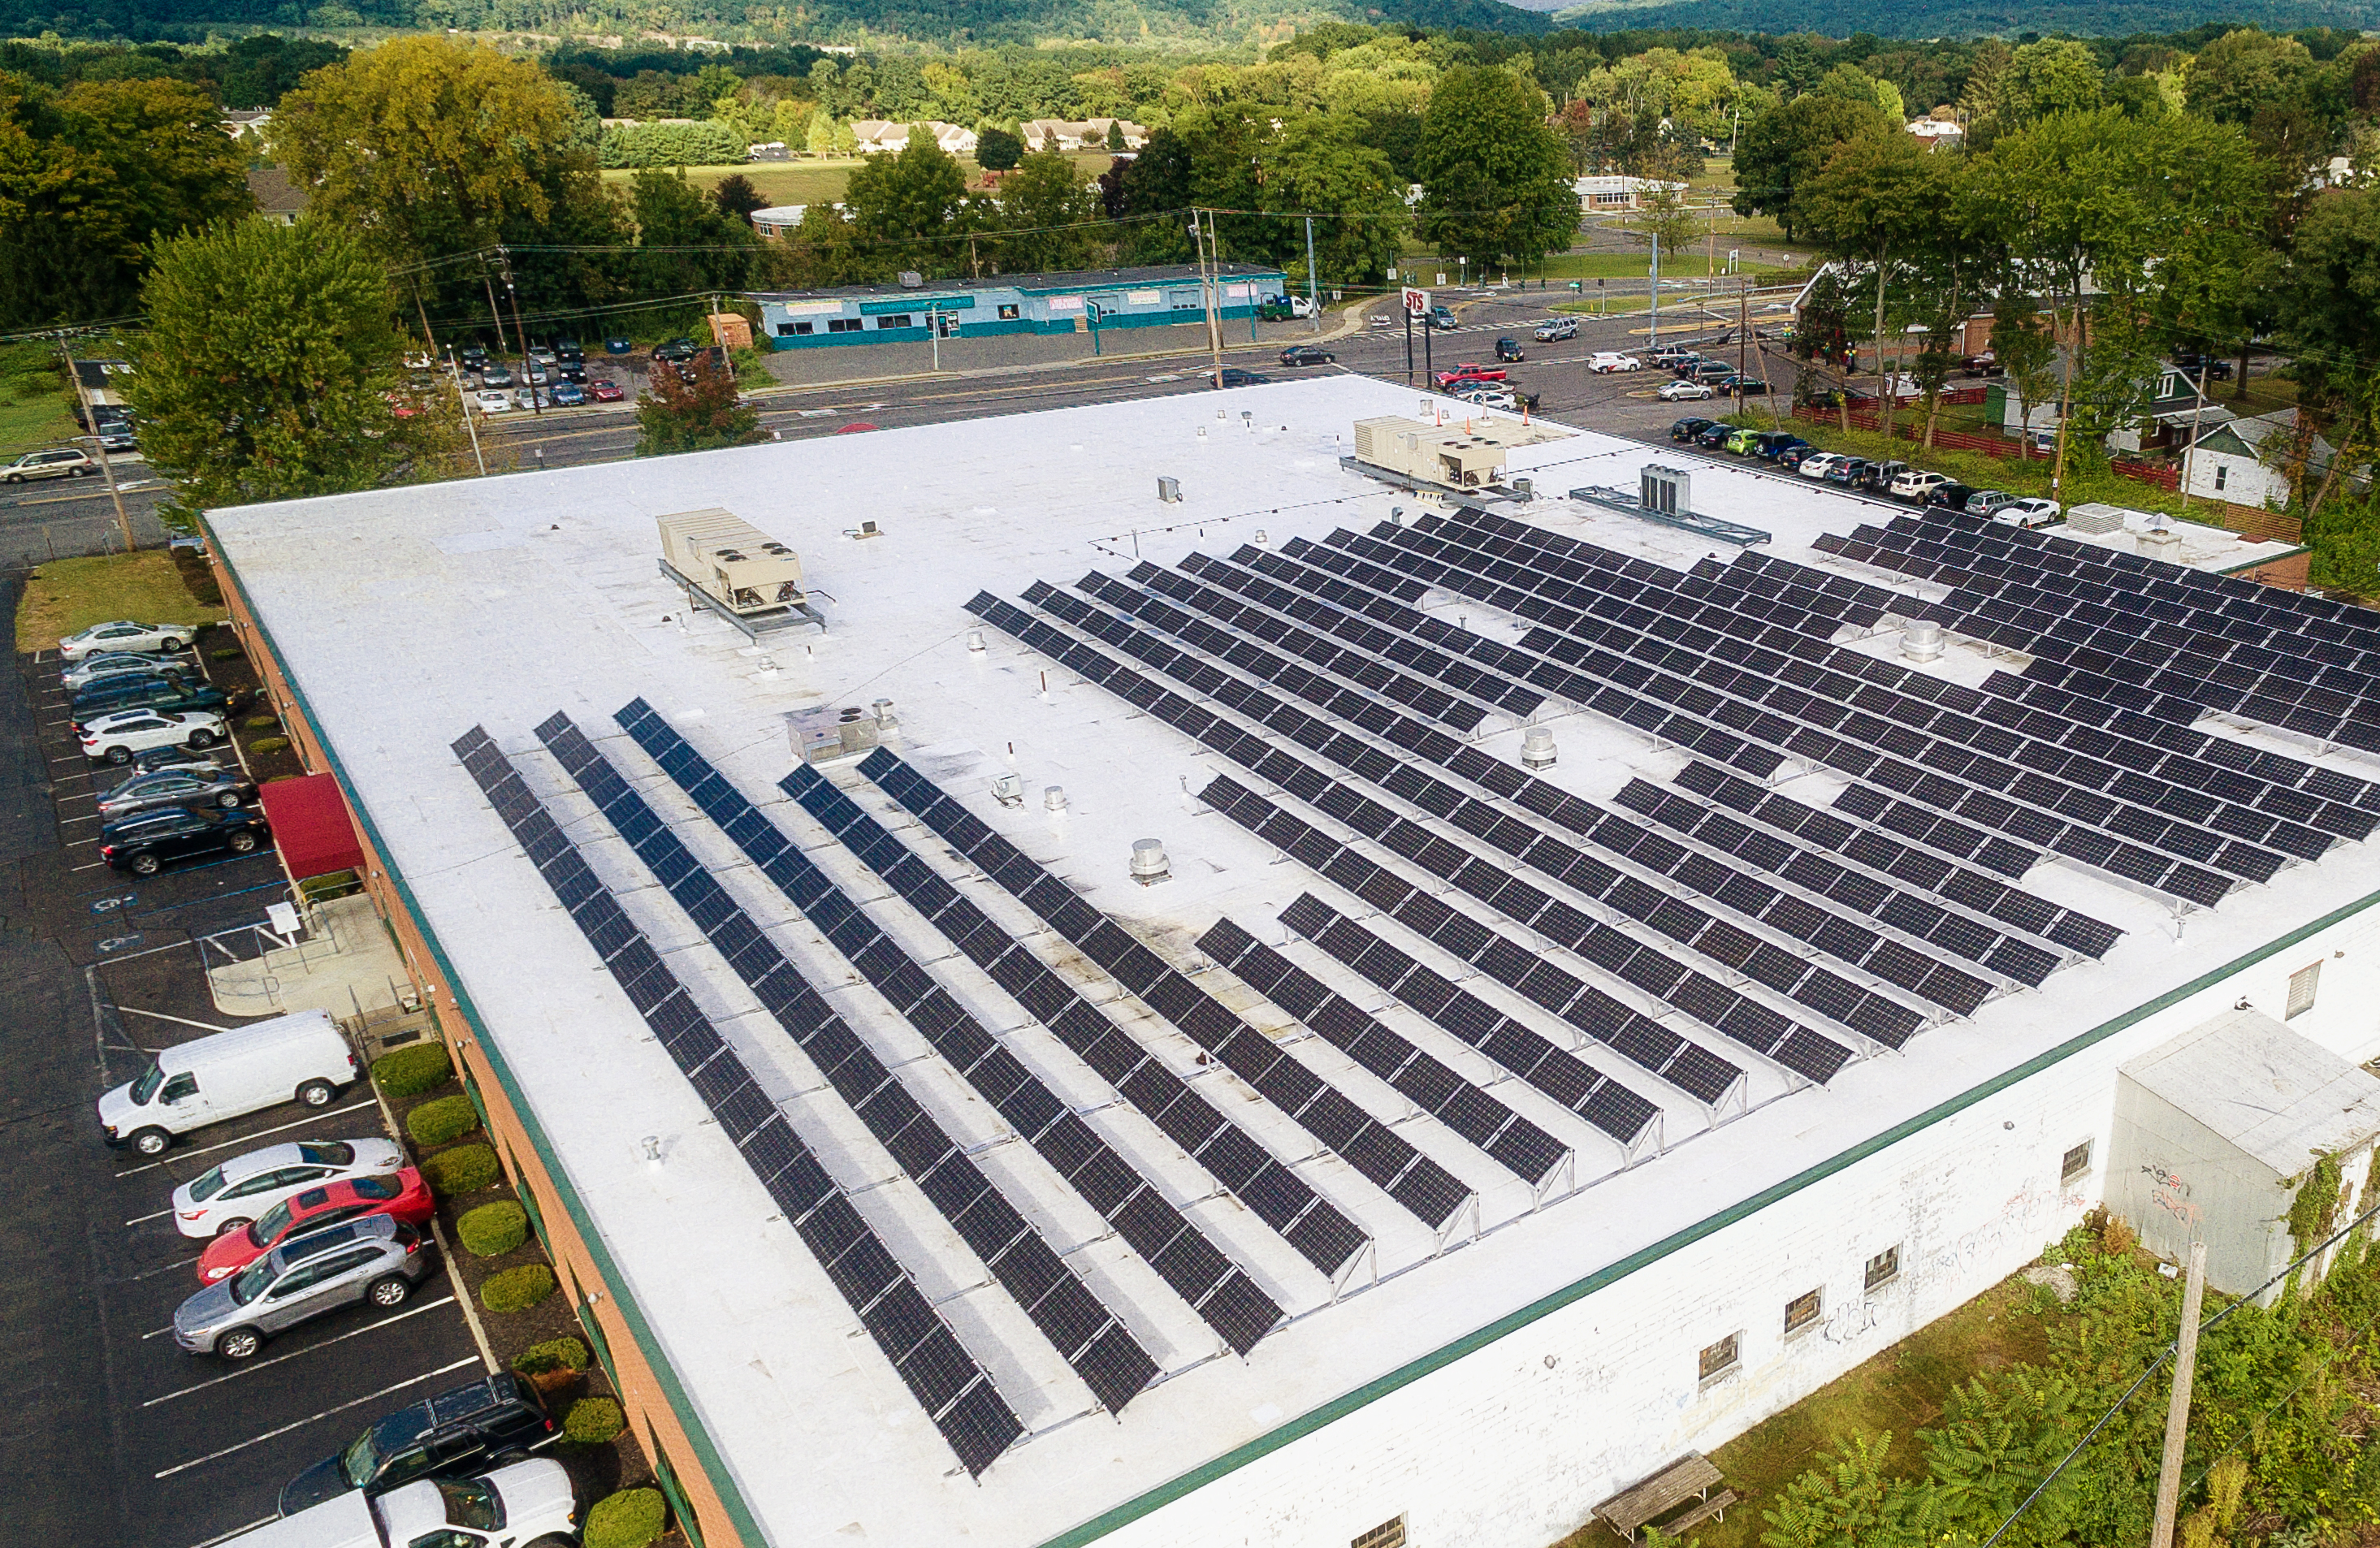 Sunrise Solar Solutions Completes First Community Distributed Generation (CDG) Solar Energy System in Central Hudson Territory